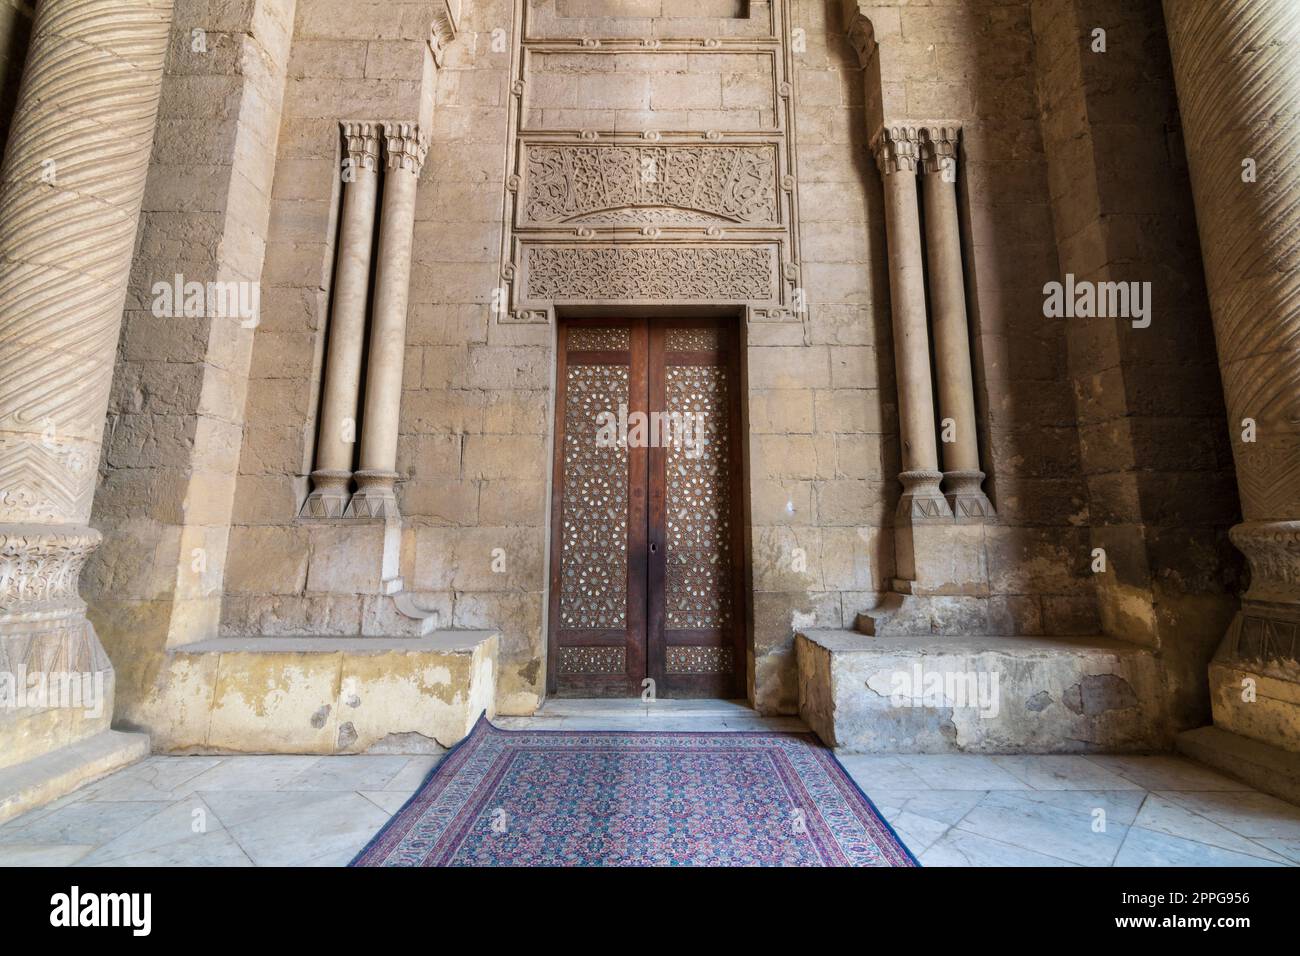 External old decorated bricks stone wall with arabesque decorated wooden door framed by stone ornate cylindrical columns Stock Photo